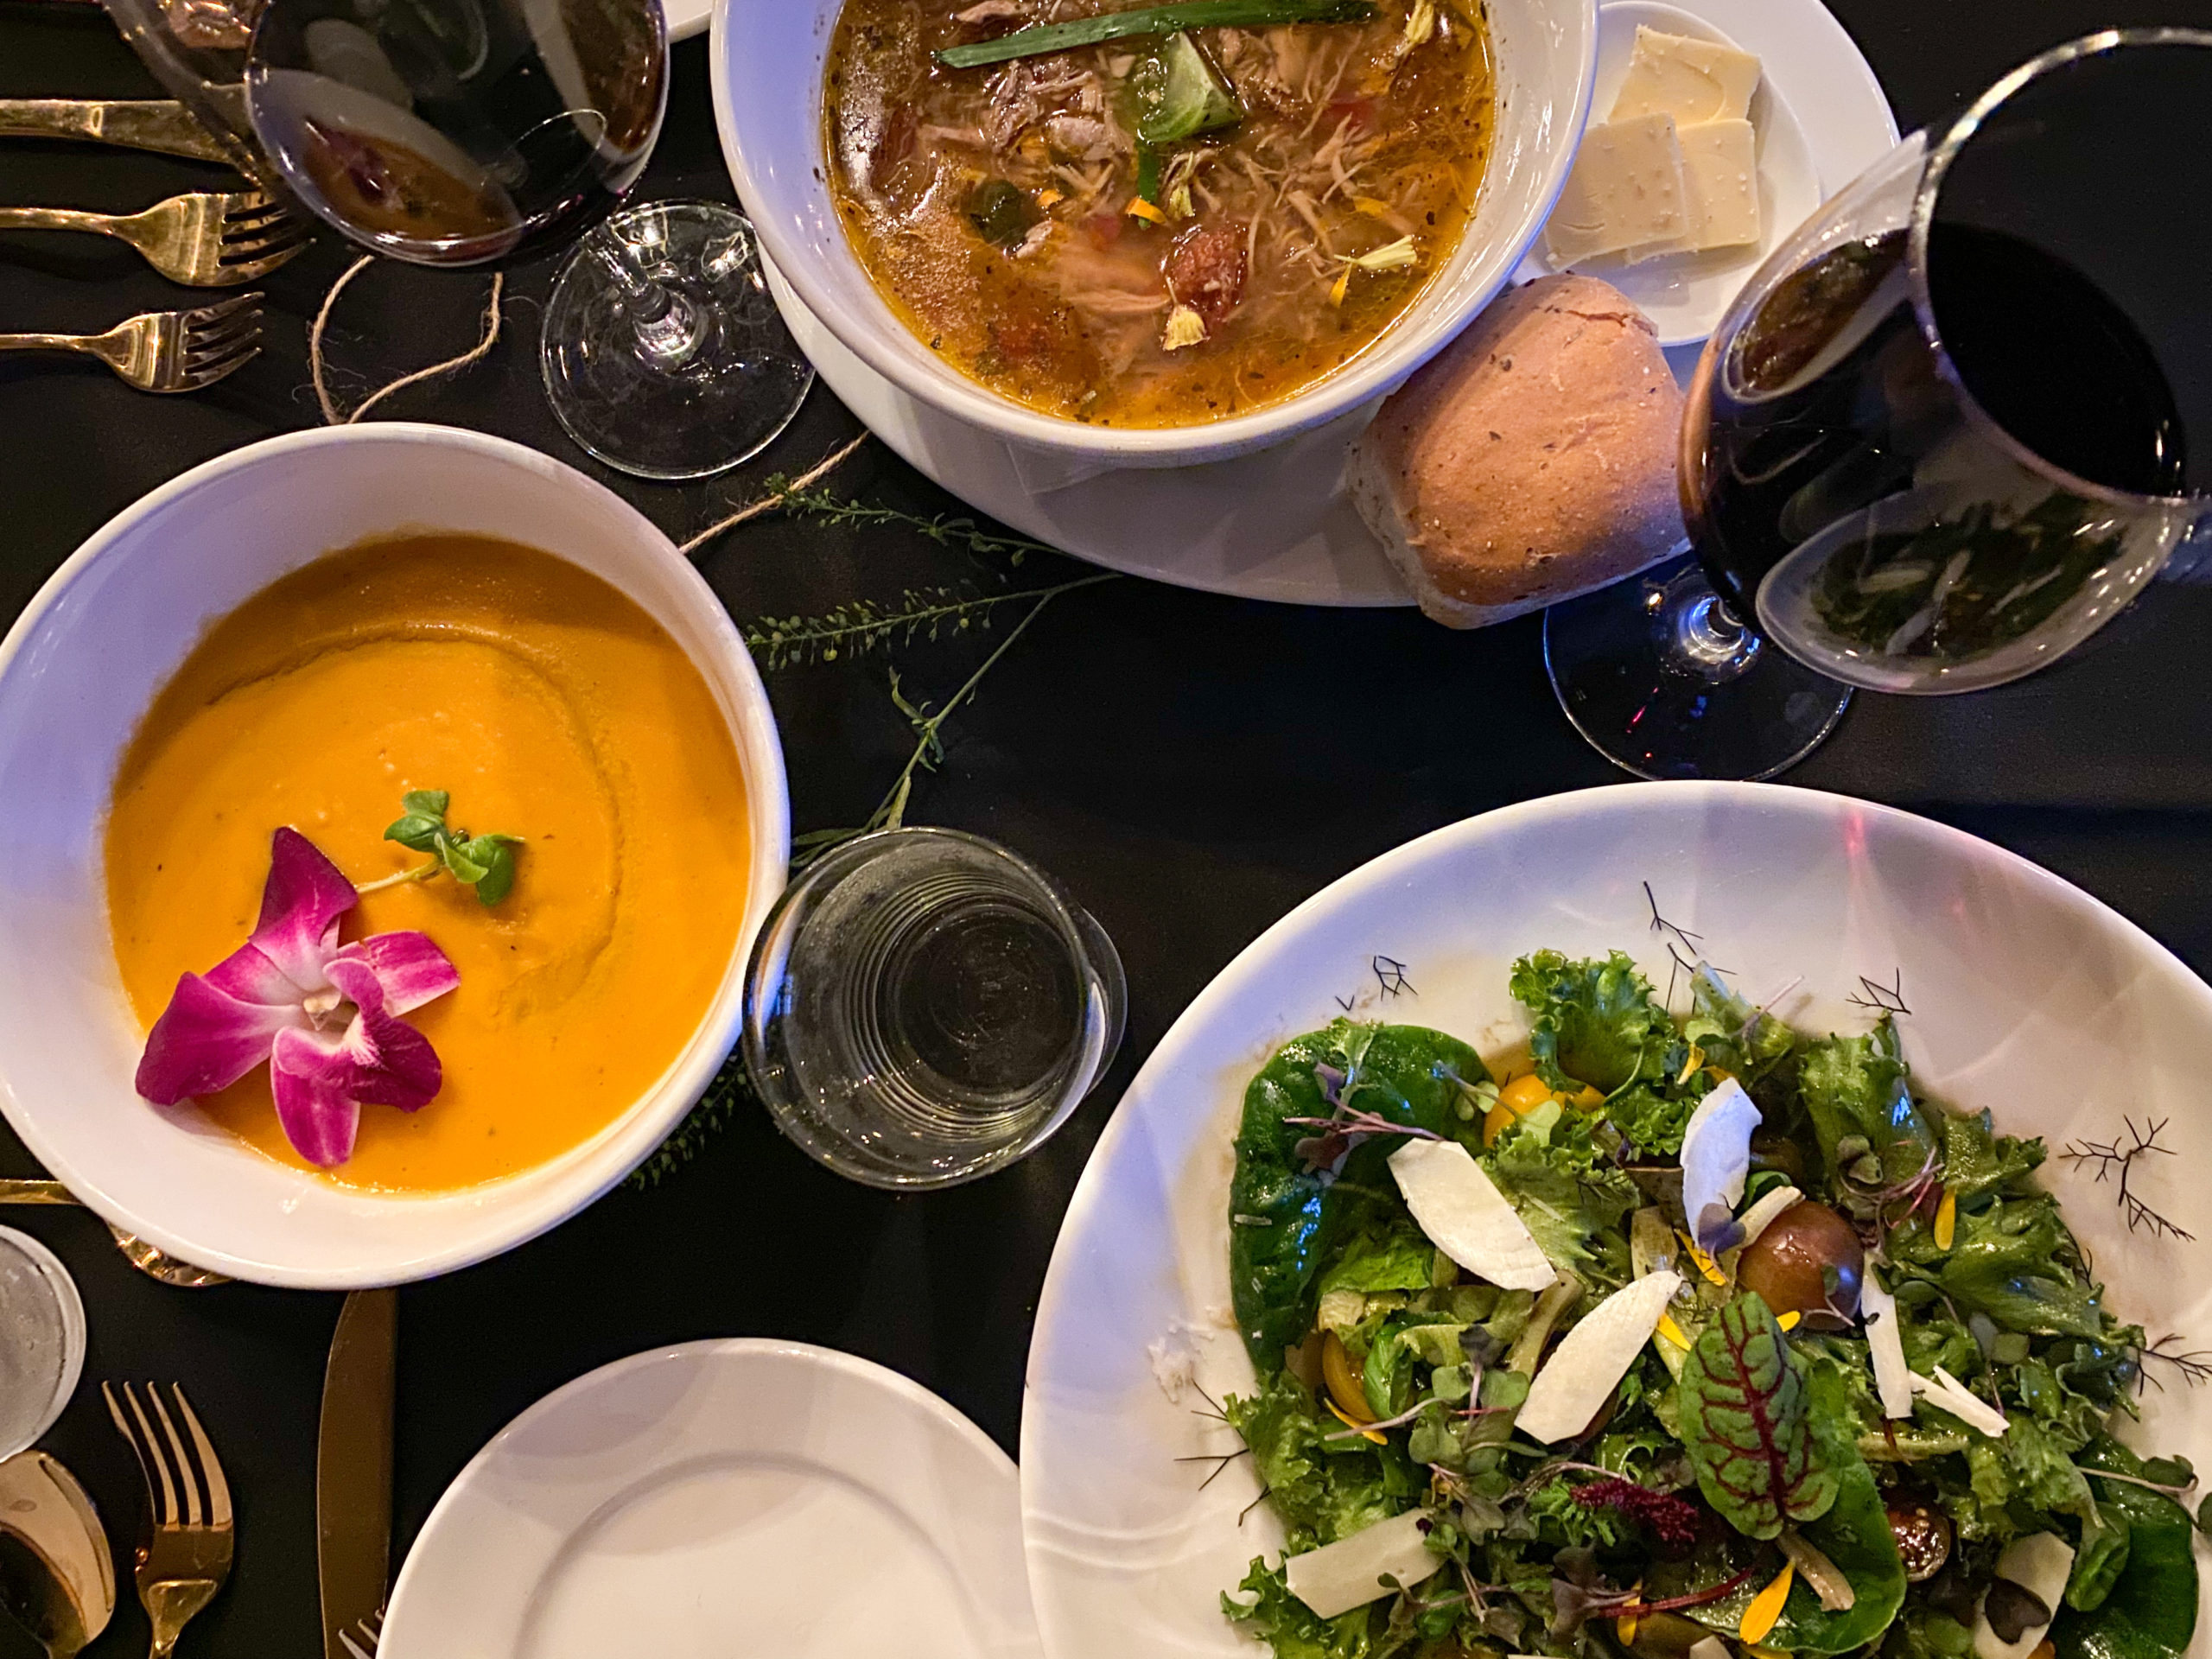 Pasture-raised Chicken Soup, Creamy Roasted Sweet Potato Soup and the Salad